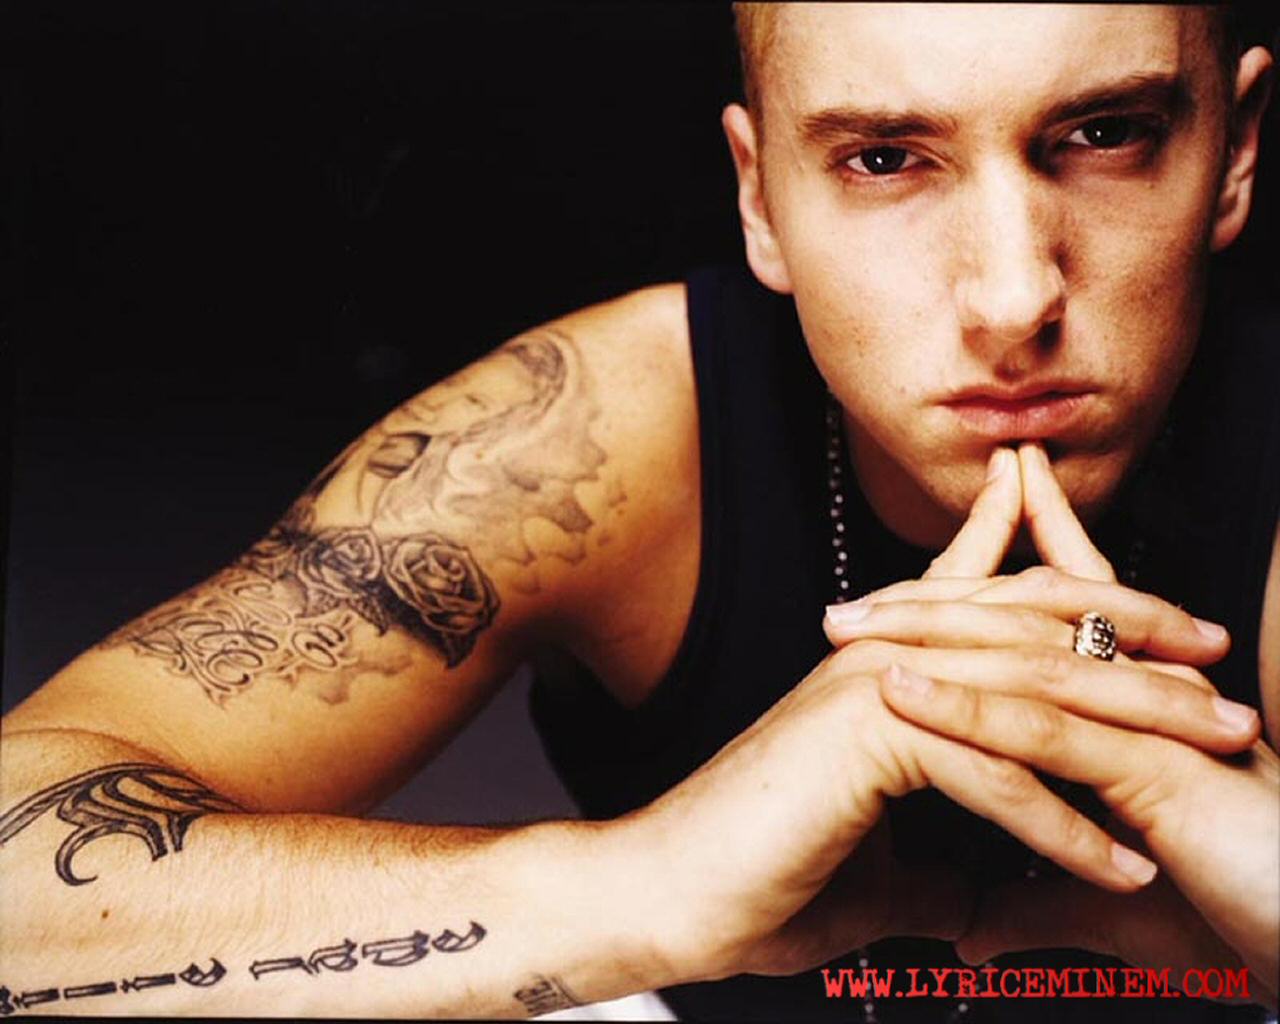 Celebrity Hairstyles And Tattoo Pictures Eminem Hairstyles Tattoo Design Gallery